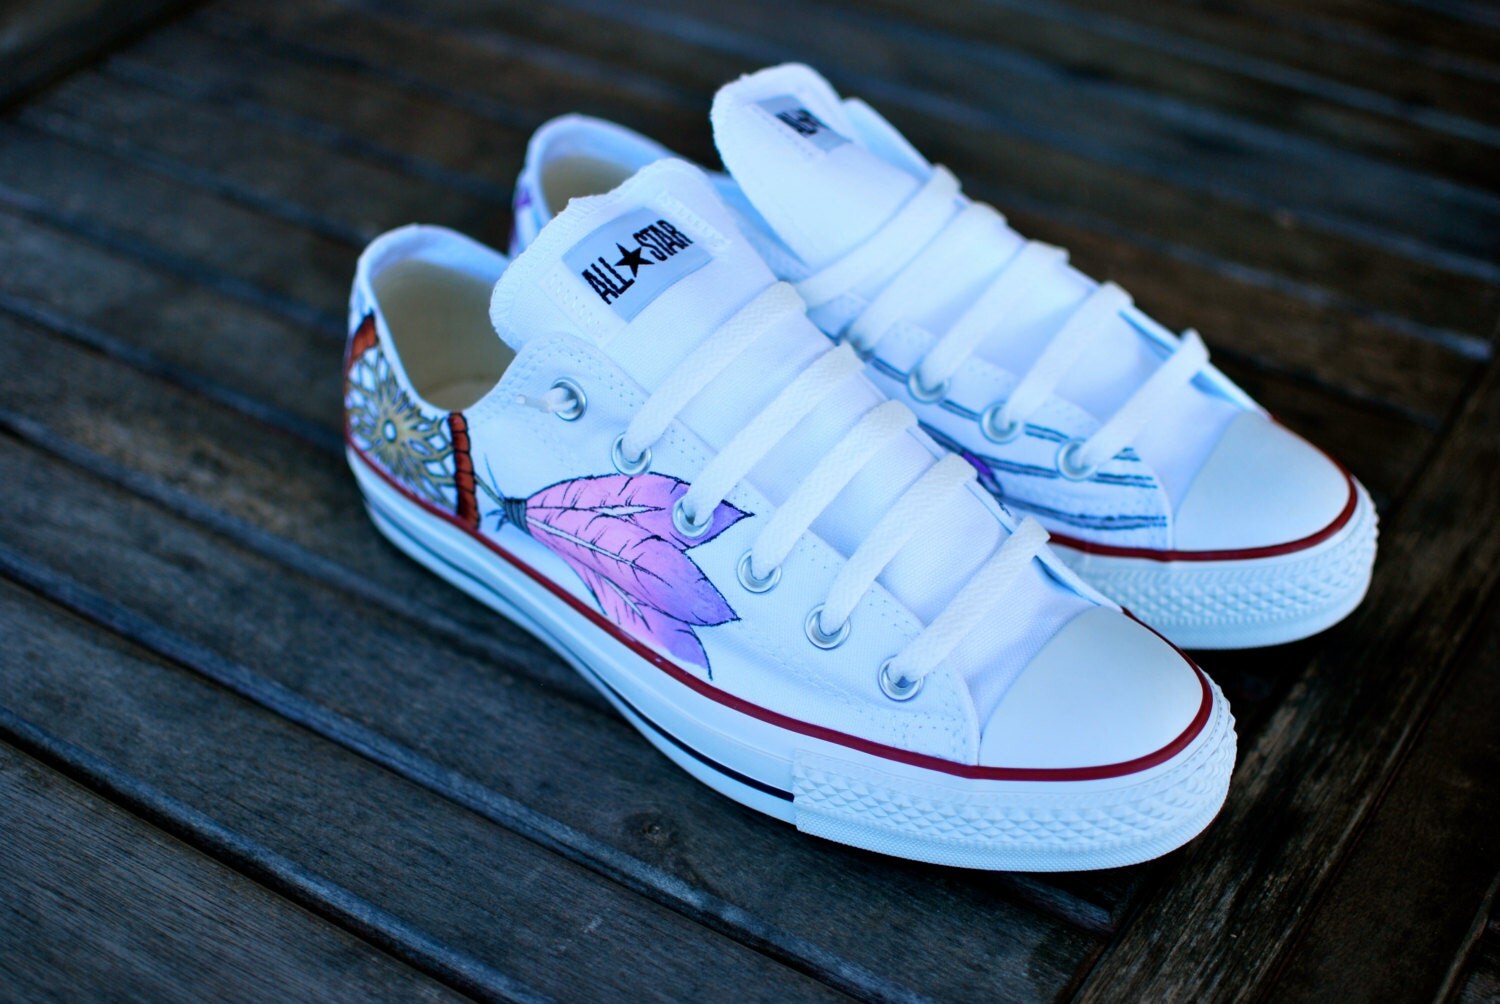 Items similar to Musical Dream Catcher Converse shoes on Etsy